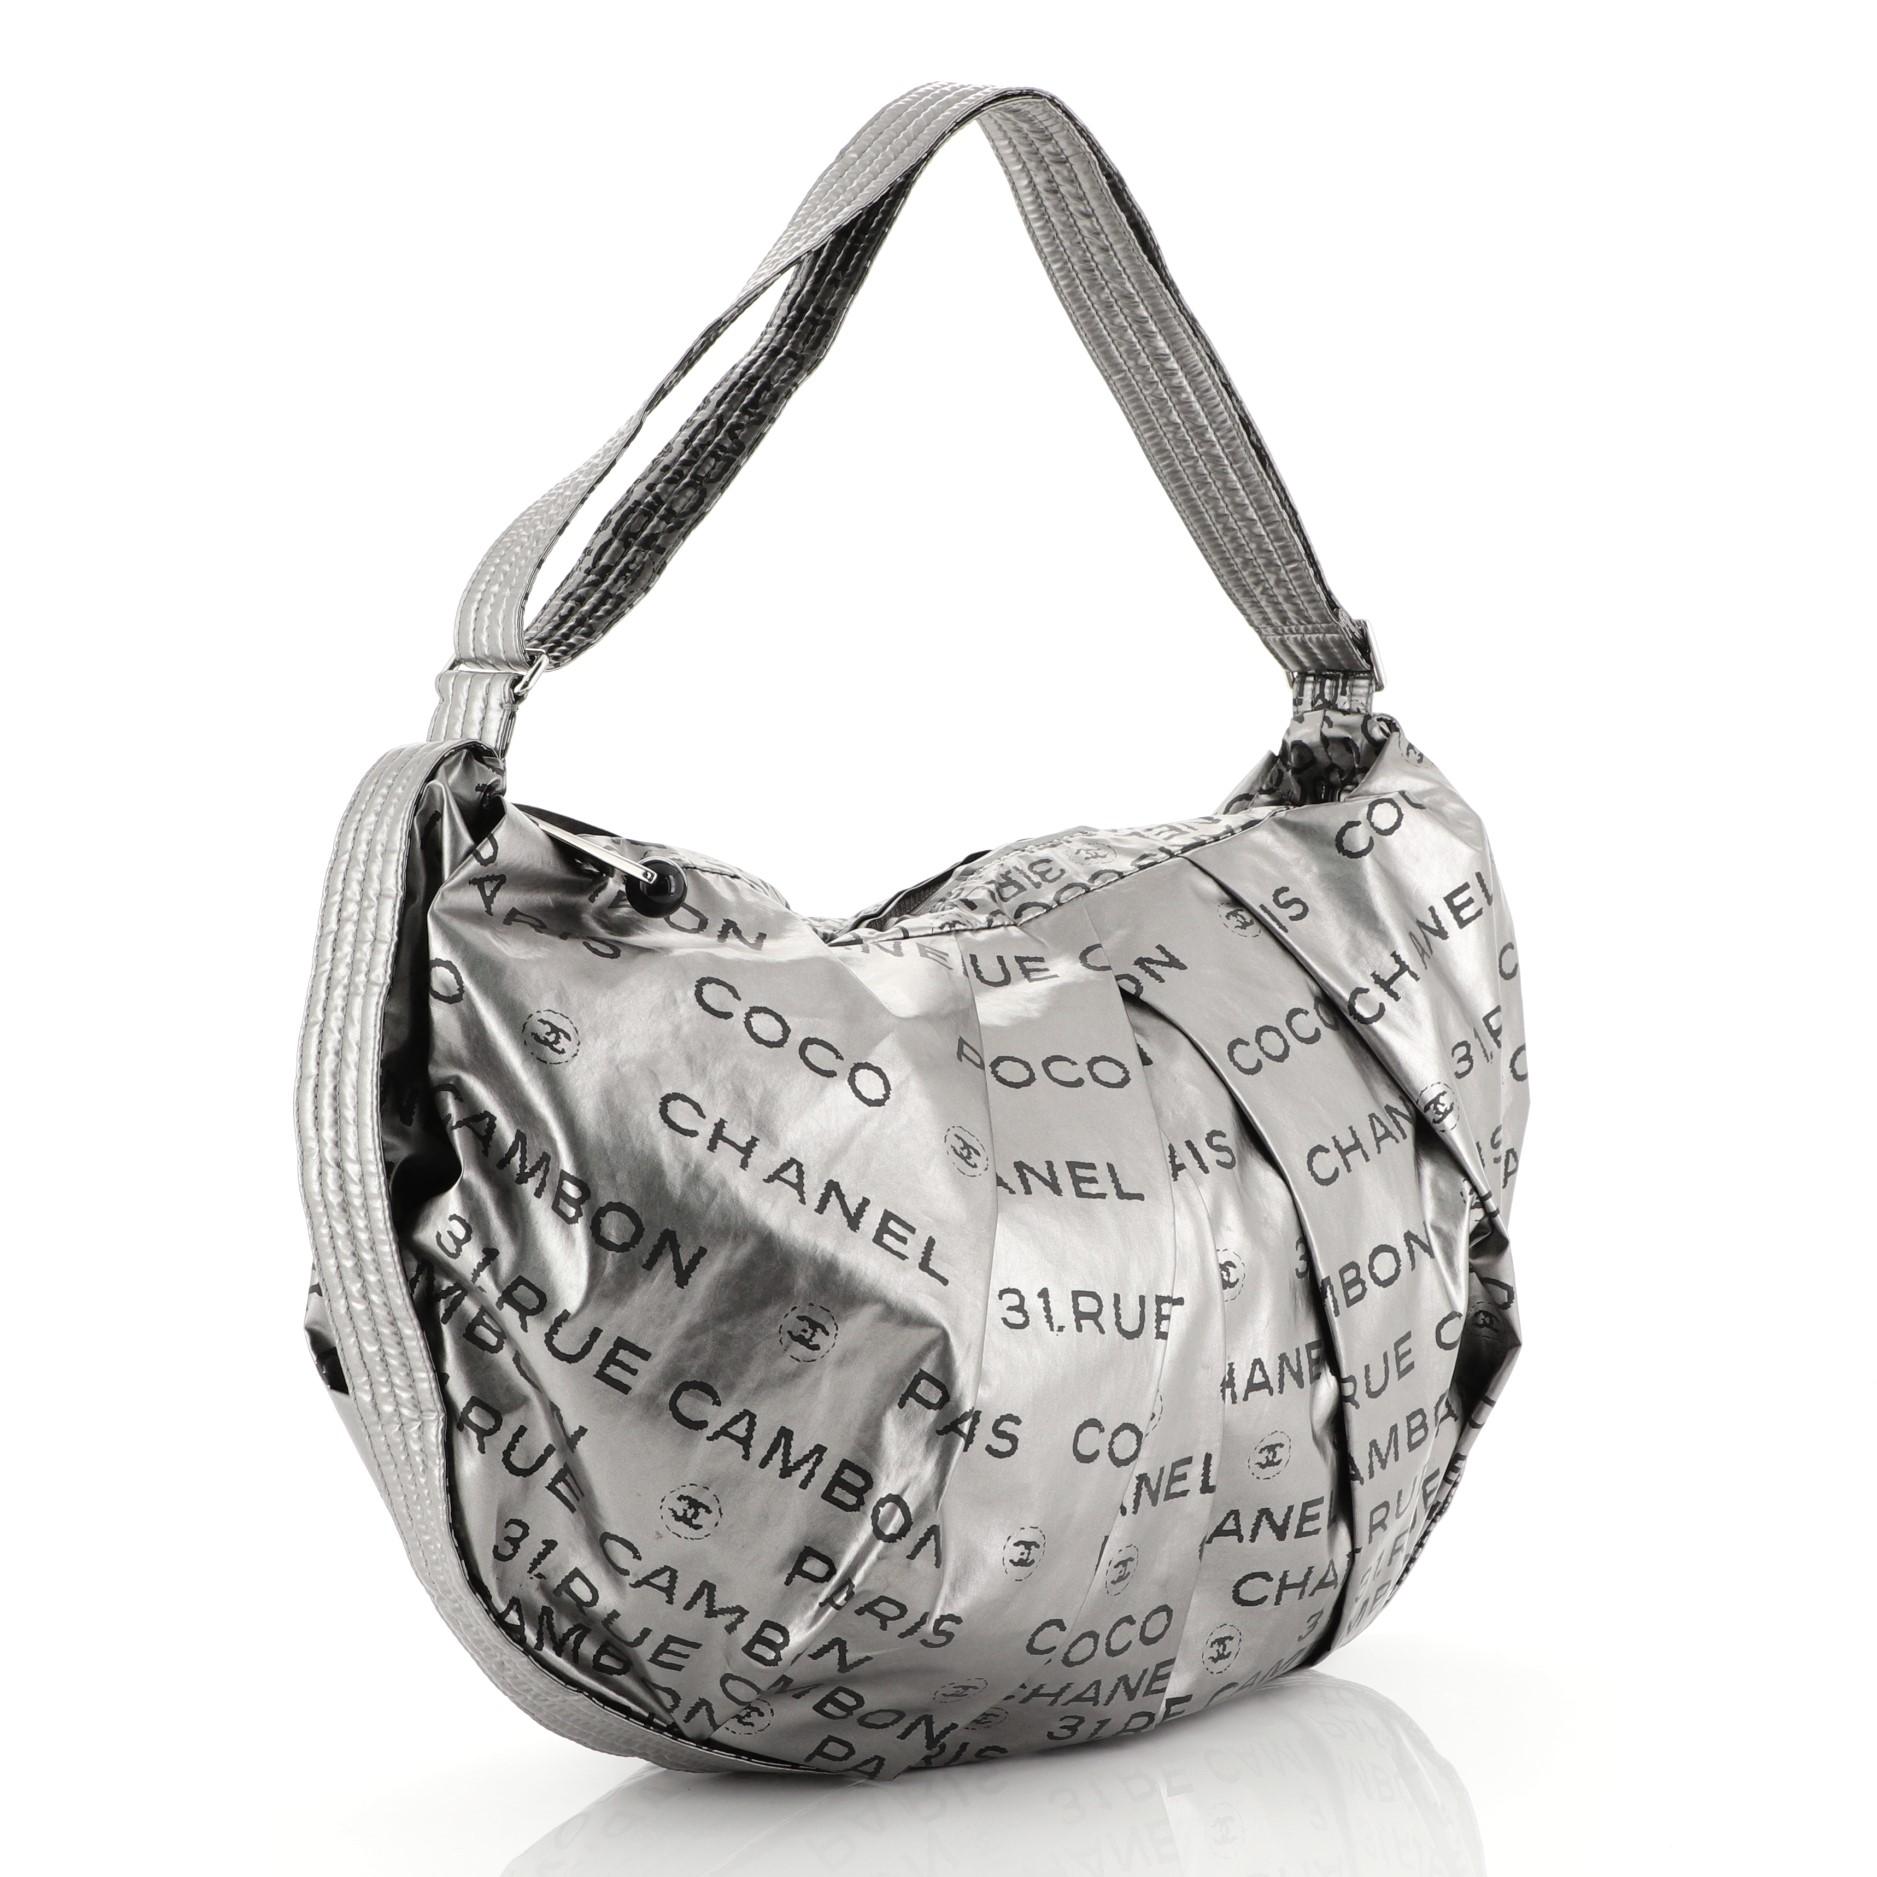 This Chanel Unlimited Shoulder Bag Nylon Large, crafted in silver printed nylon, features an adjustable flat strap, printed Chanel Paris 31 Rue Cambon all over, and silver-tone hardware. Its zip closure opens to a black fabric interior with zip and